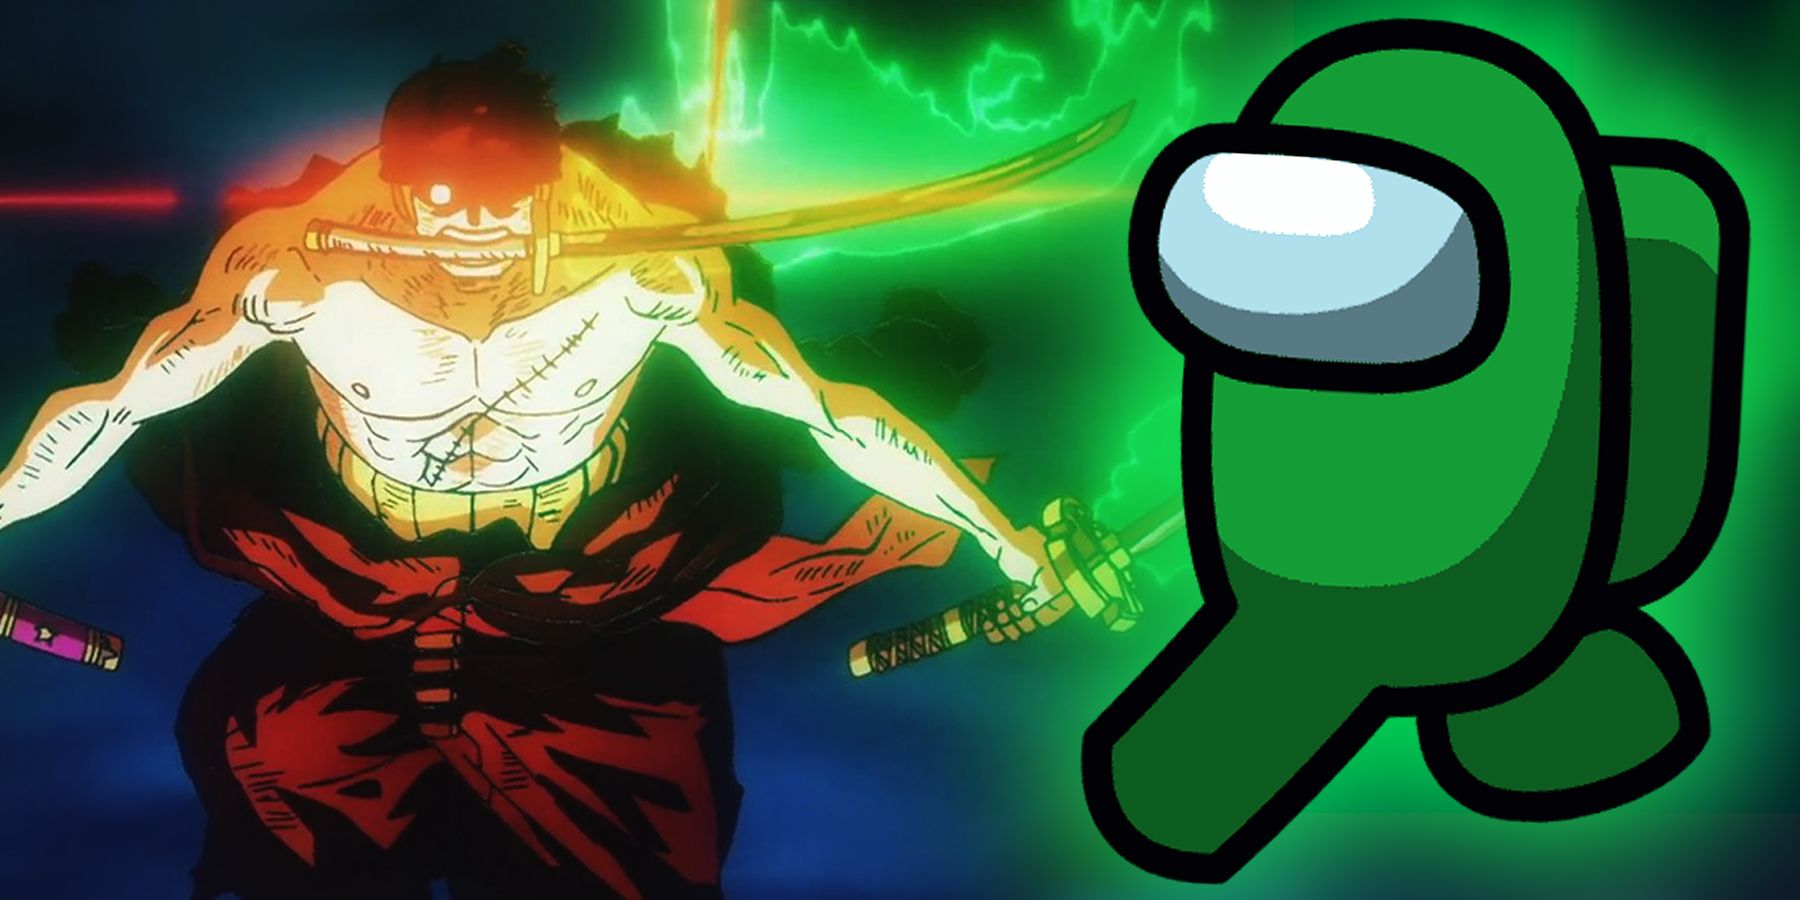 Roronoa Zoro using his King of Hell sword style in anime One Piece and a green crewmate from game Among Us